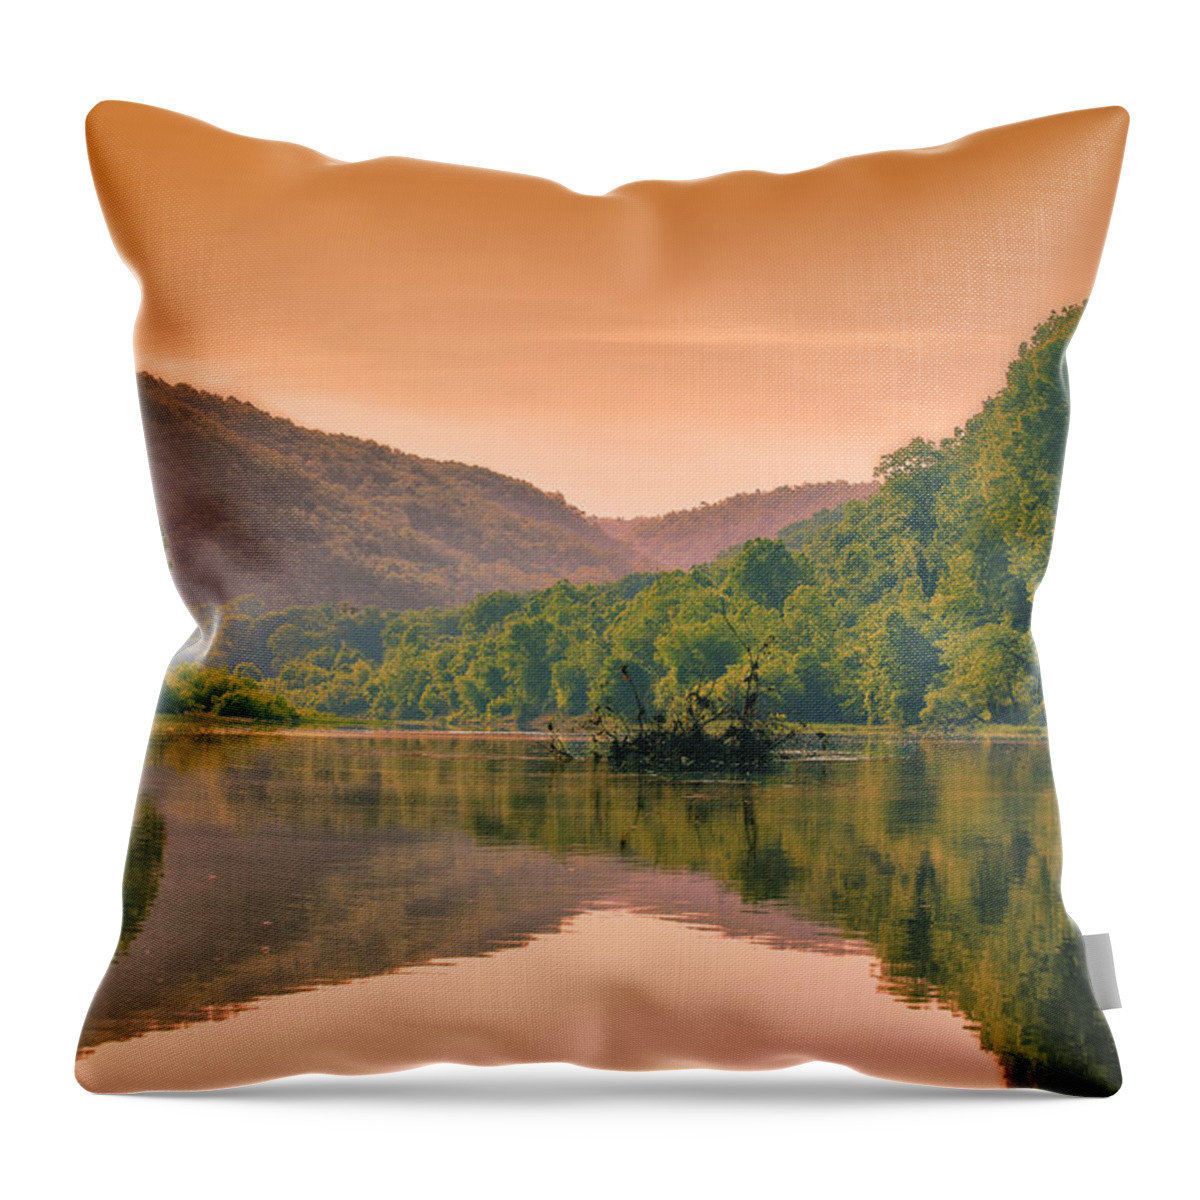 Sunset Throw Pillow featuring the photograph Foggy Morning Sunrise Along Buffalo River by Bill and Linda Tiepelman